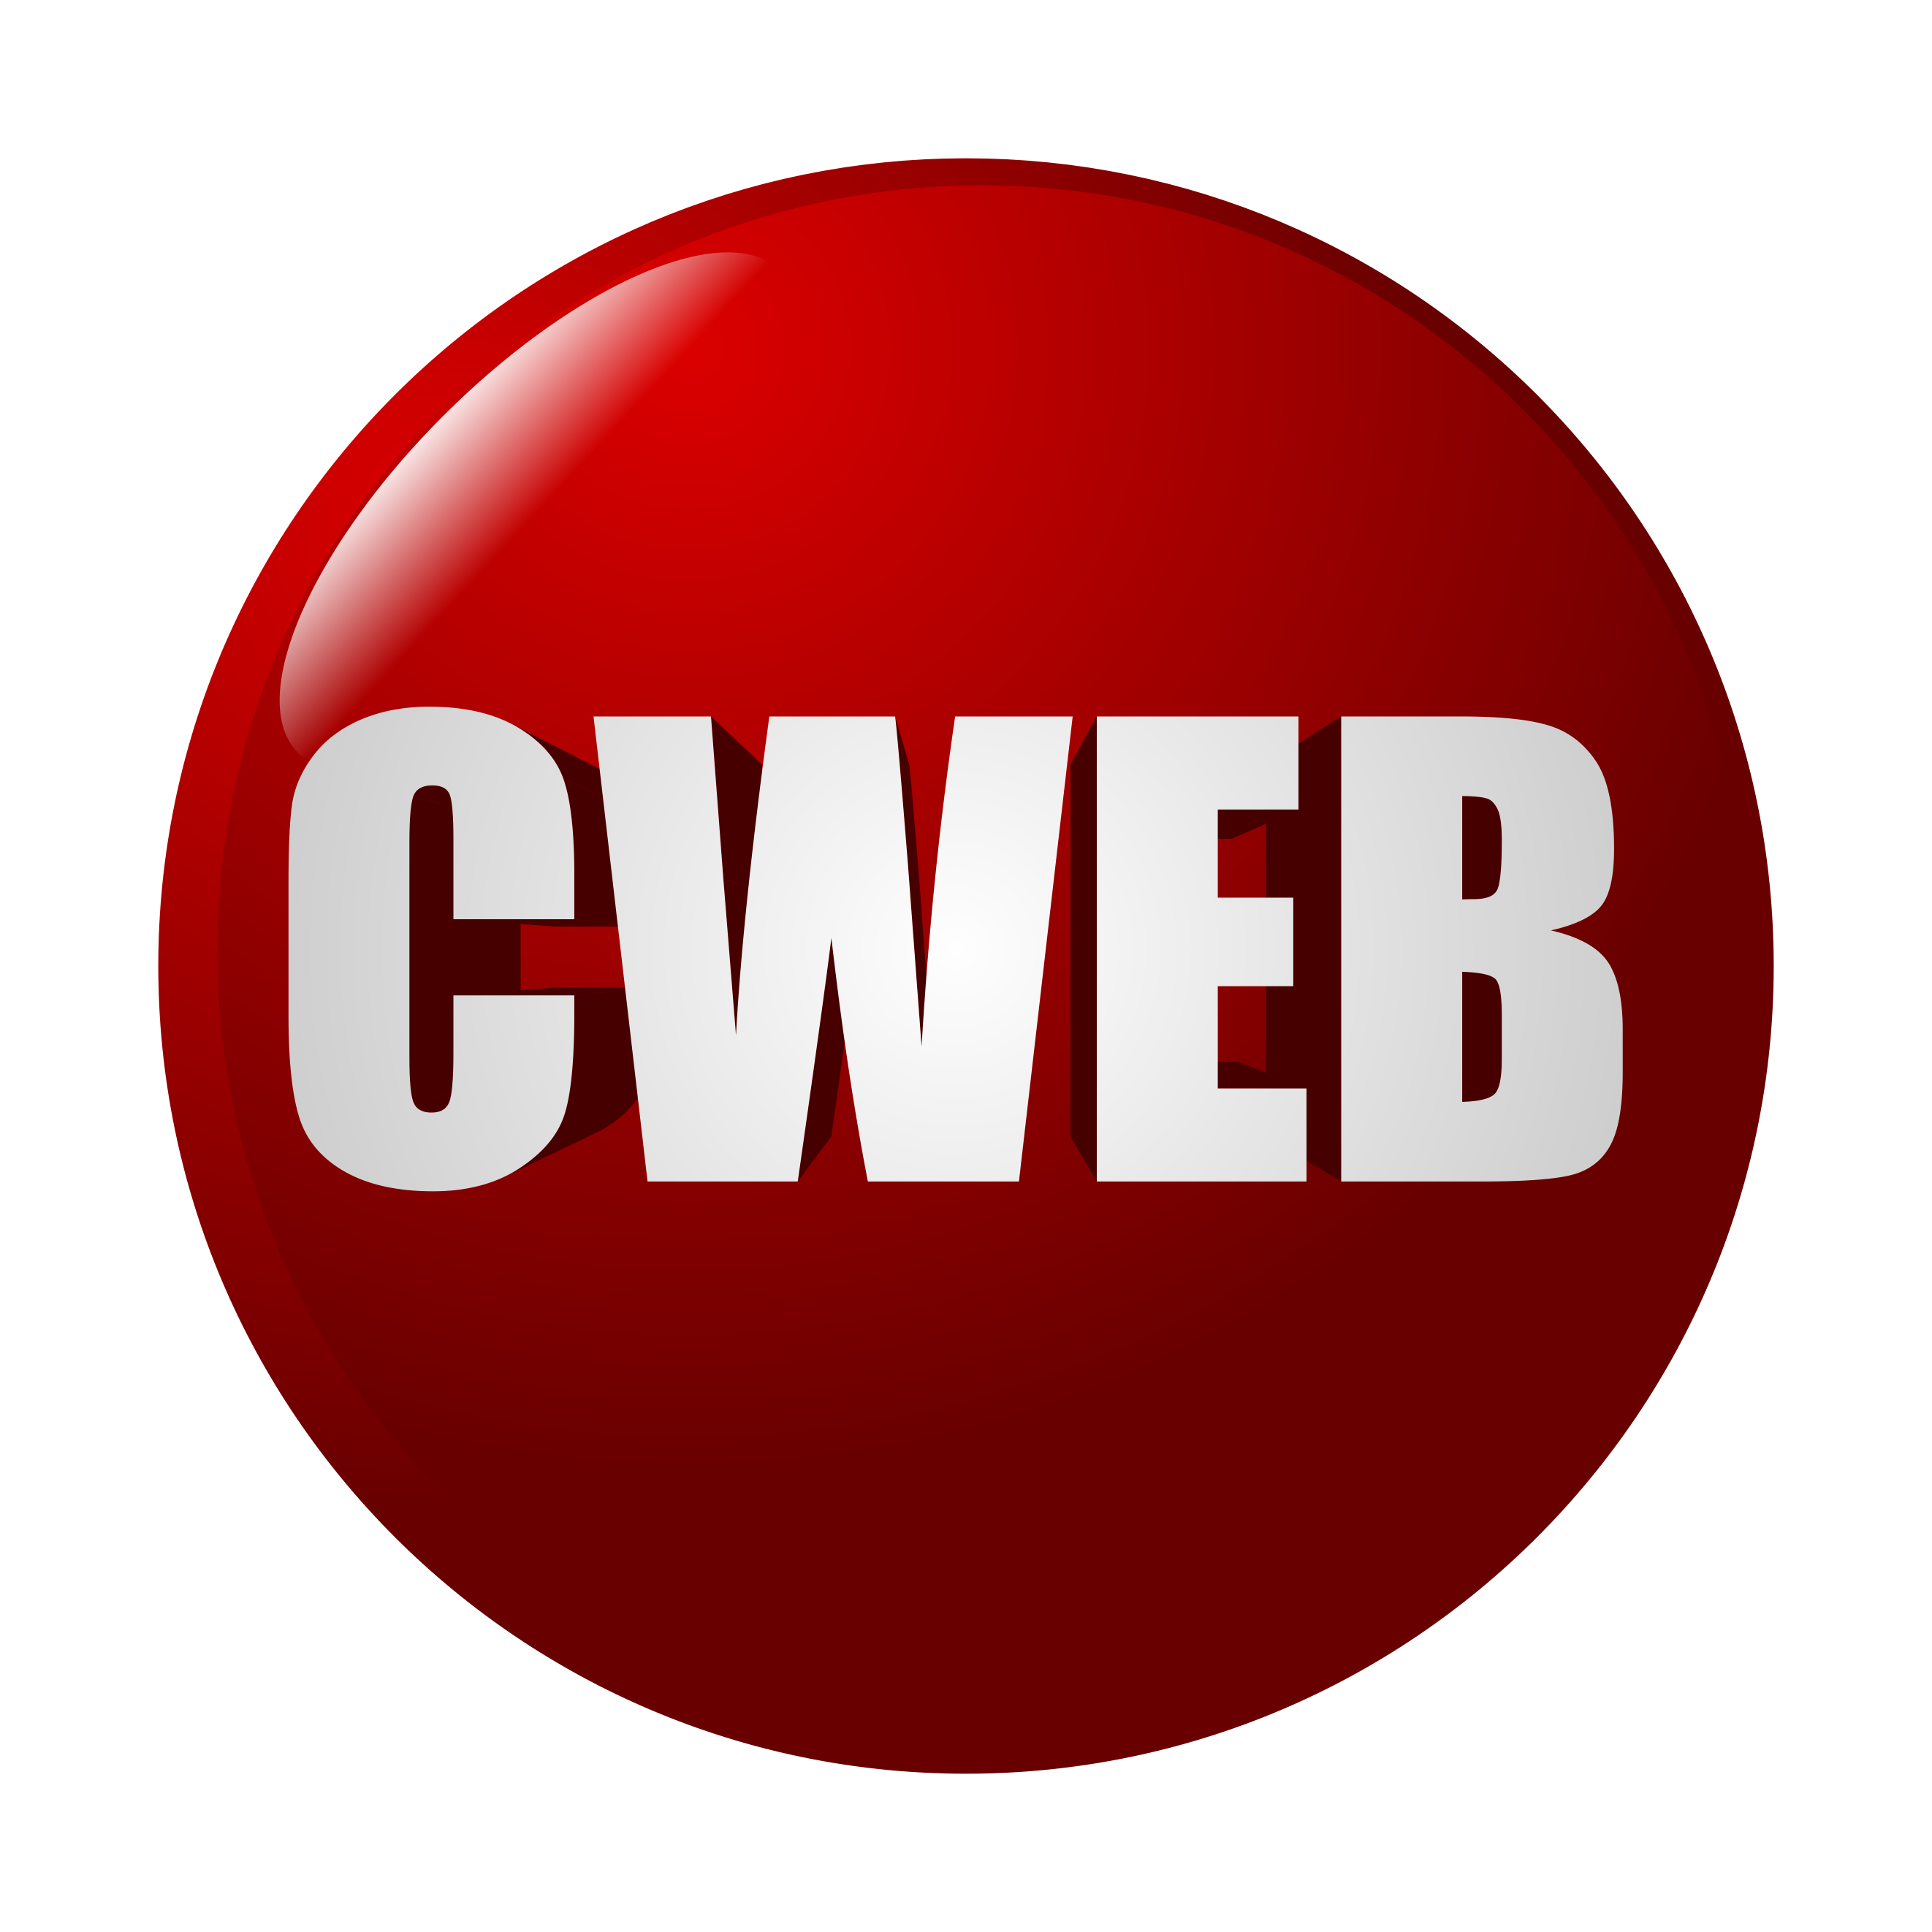 CWEB Publishes Daily News Highlights for September 25 that Matter the Most